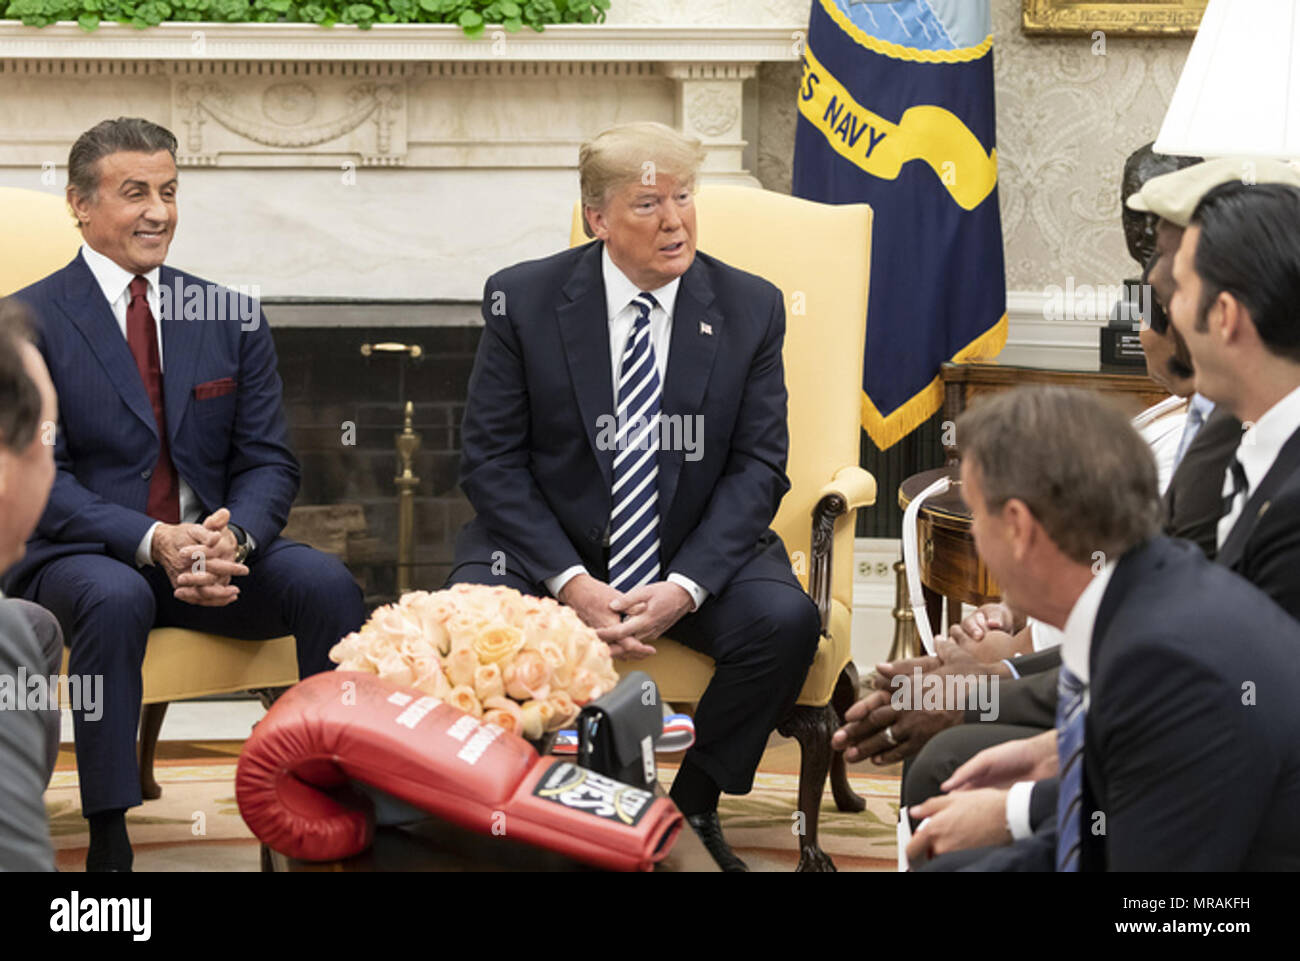 washington-dc-week-of-may-21-president-donald-j-trump-joined-by-actor-sylvester-stallone-left-and-three-time-champion-boxer-lennox-lewis-meets-with-members-of-the-world-boxing-council-and-linda-haywood-the-niece-of-boxer-jack-johnson-the-first-african-american-heavyweight-champion-thursday-may-24-2018-prior-to-signing-a-posthumous-pardon-for-johnson-in-the-oval-office-of-the-white-house-in-washington-dc-people-president-donald-trump-sylvester-stallone-MRAKFH.jpg